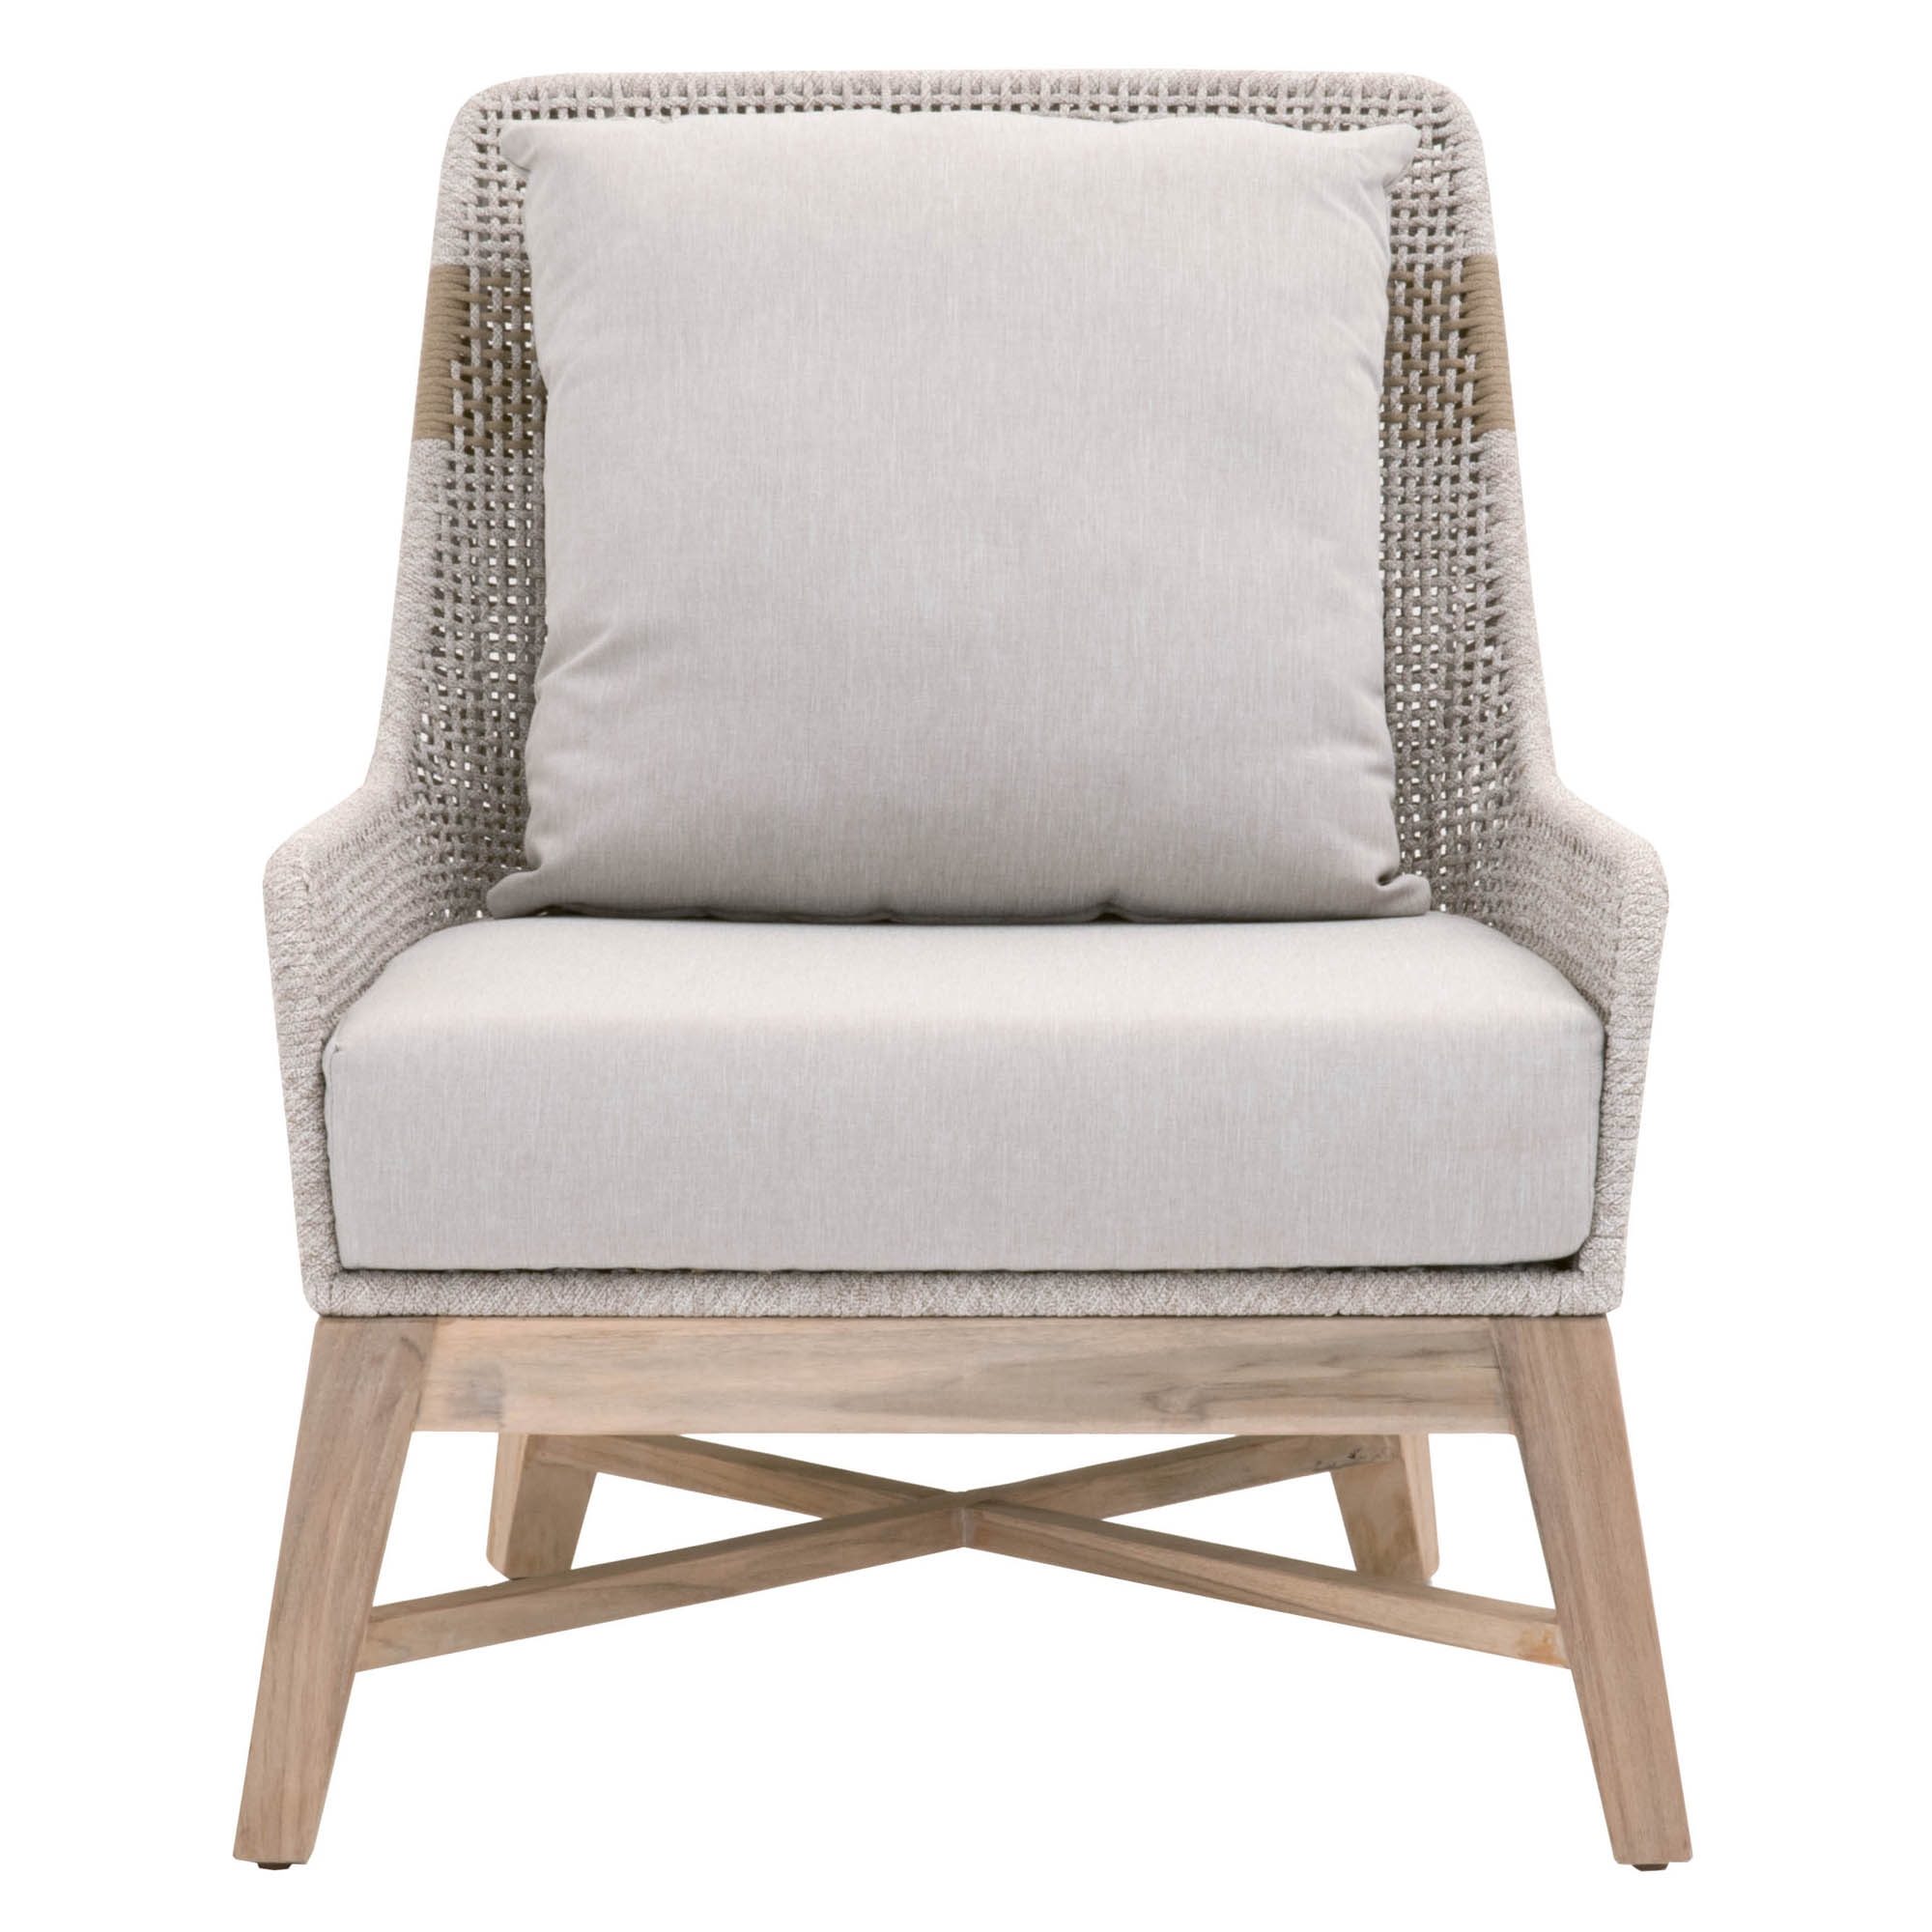 Tapestry Outdoor Club Chair, Taupe - Image 0